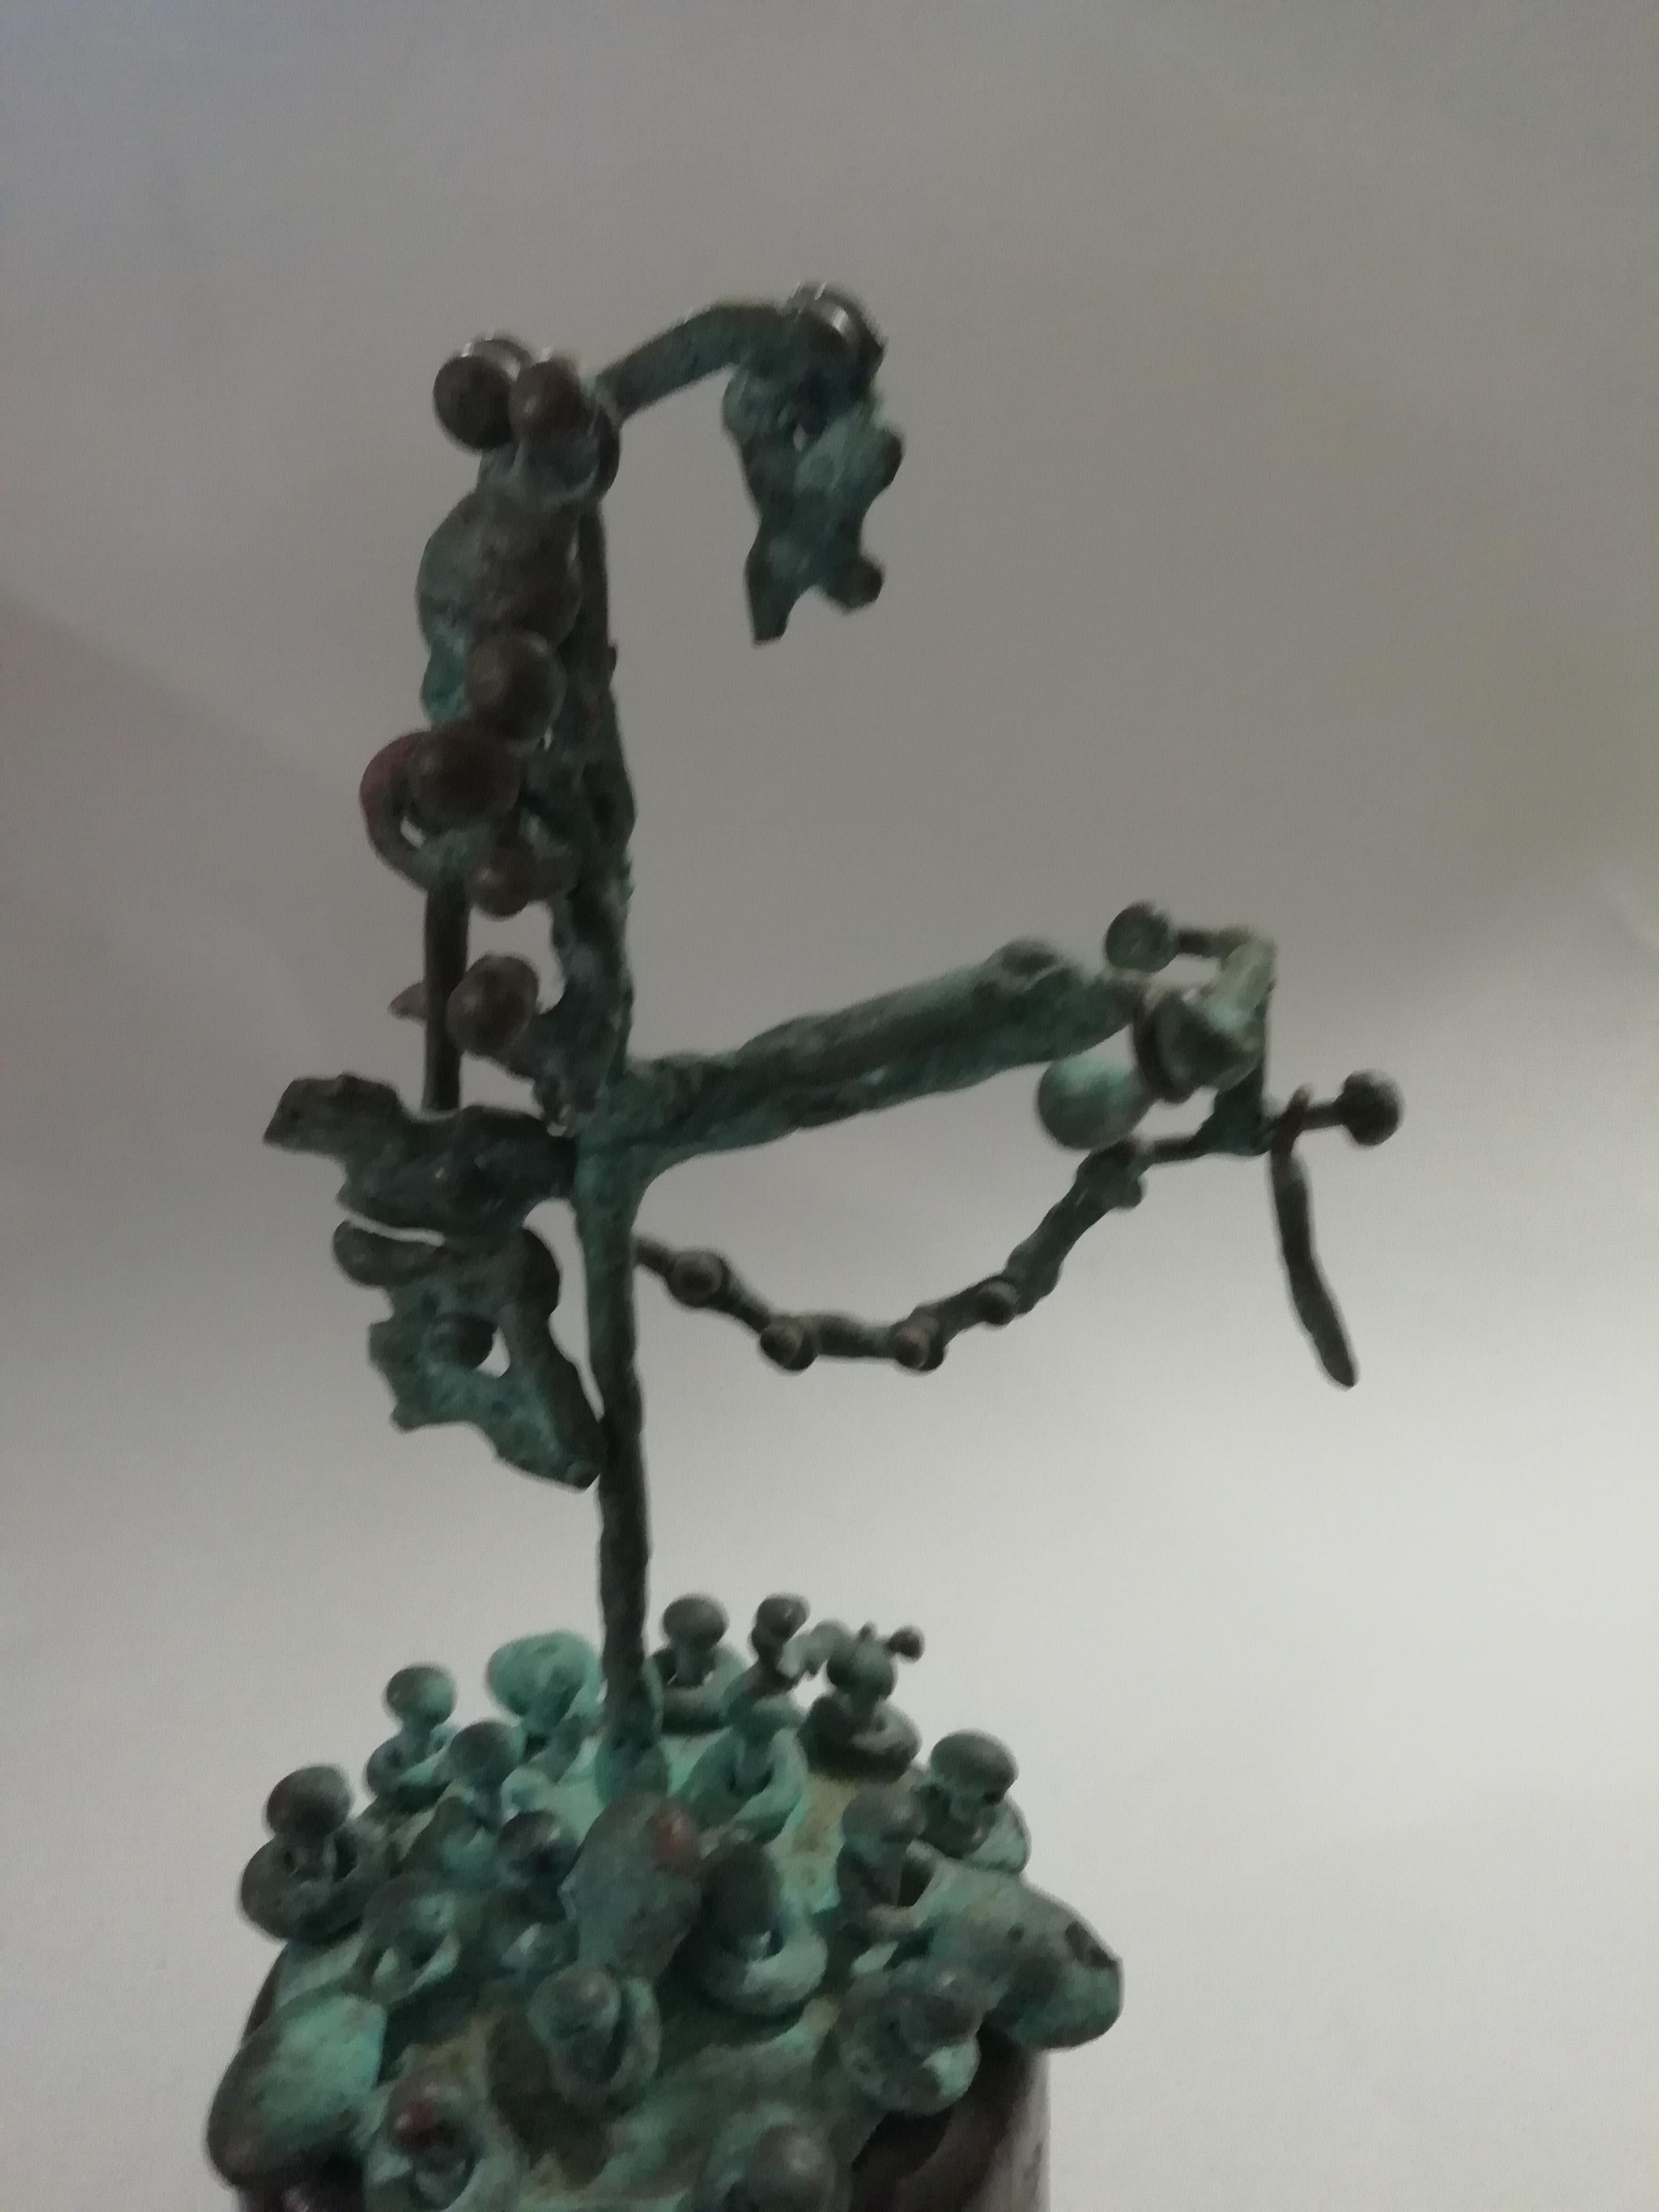 A rare Brutalist style Kinetic sculpture by Hungarian-born Mexican artist Pal Kepenyes. The organic design depicts a tree over a wood base. No signature.

A sculptor from Hungary who was nationalized Mexican, Pal Kepenyes resides in Acapulco where